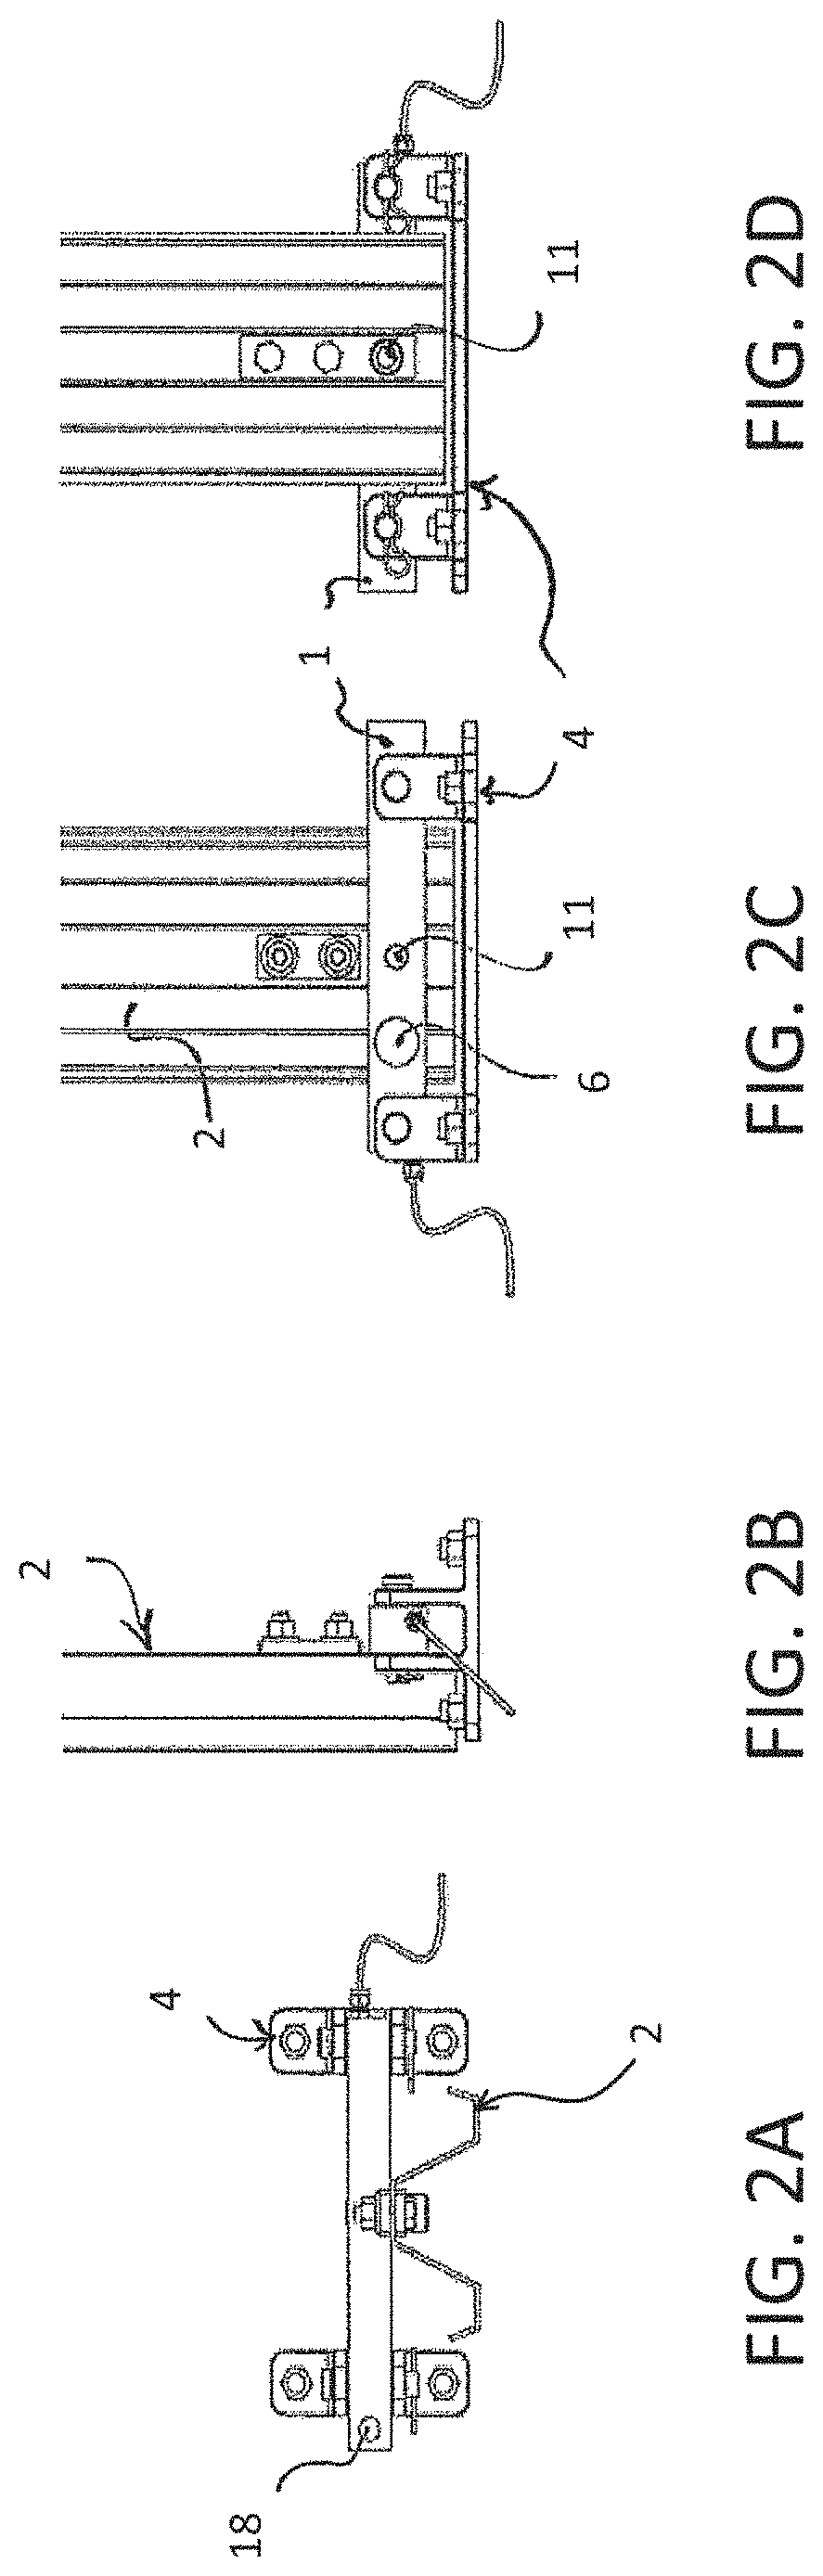 Method and apparatus to monitor a reservoir or a structure